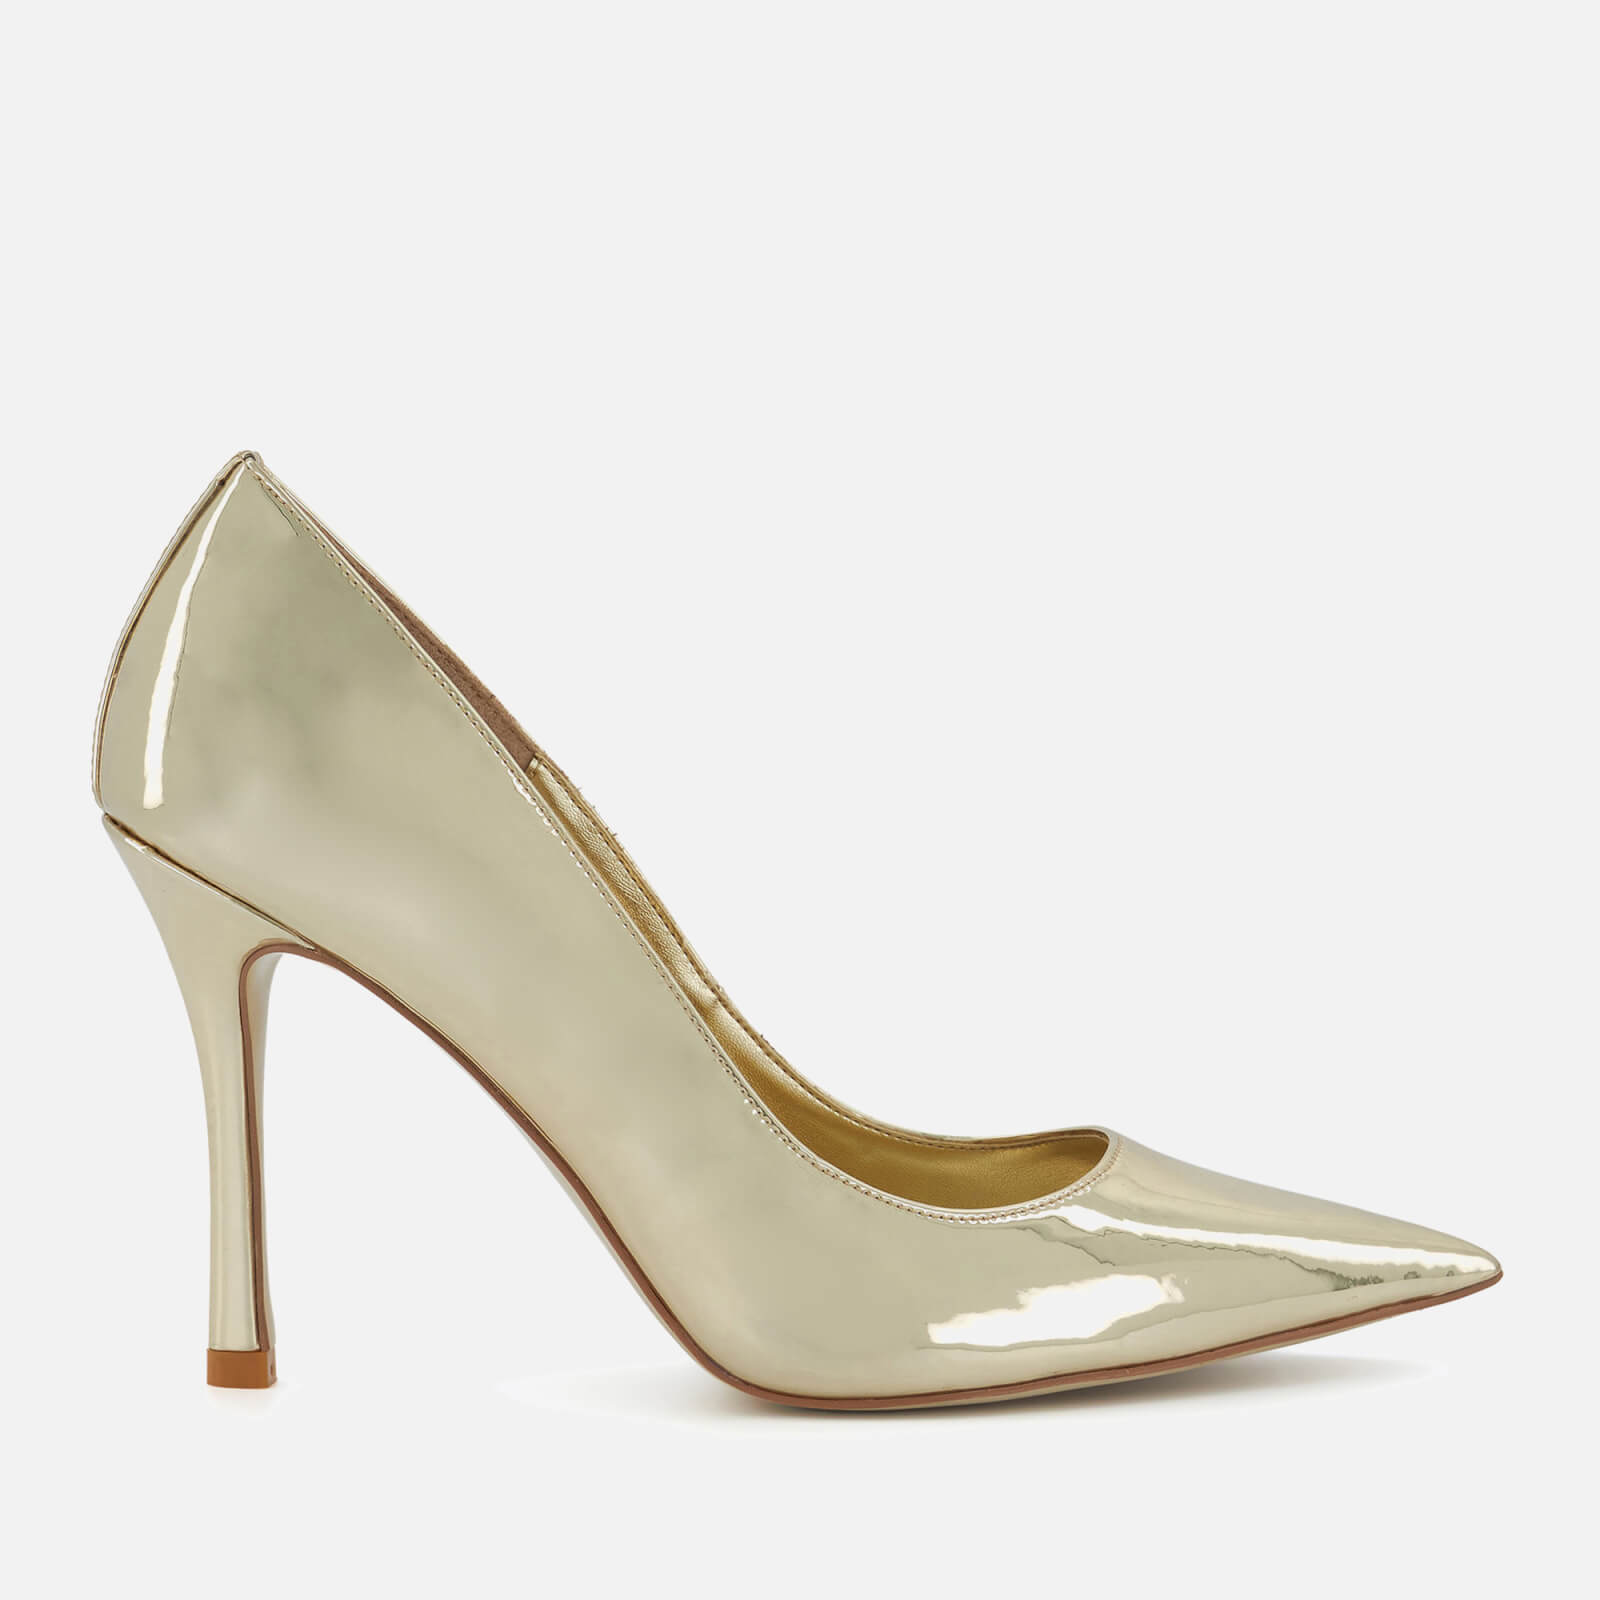 Dune Women’s Attention Metallic Patent-Leather Heeled Pumps